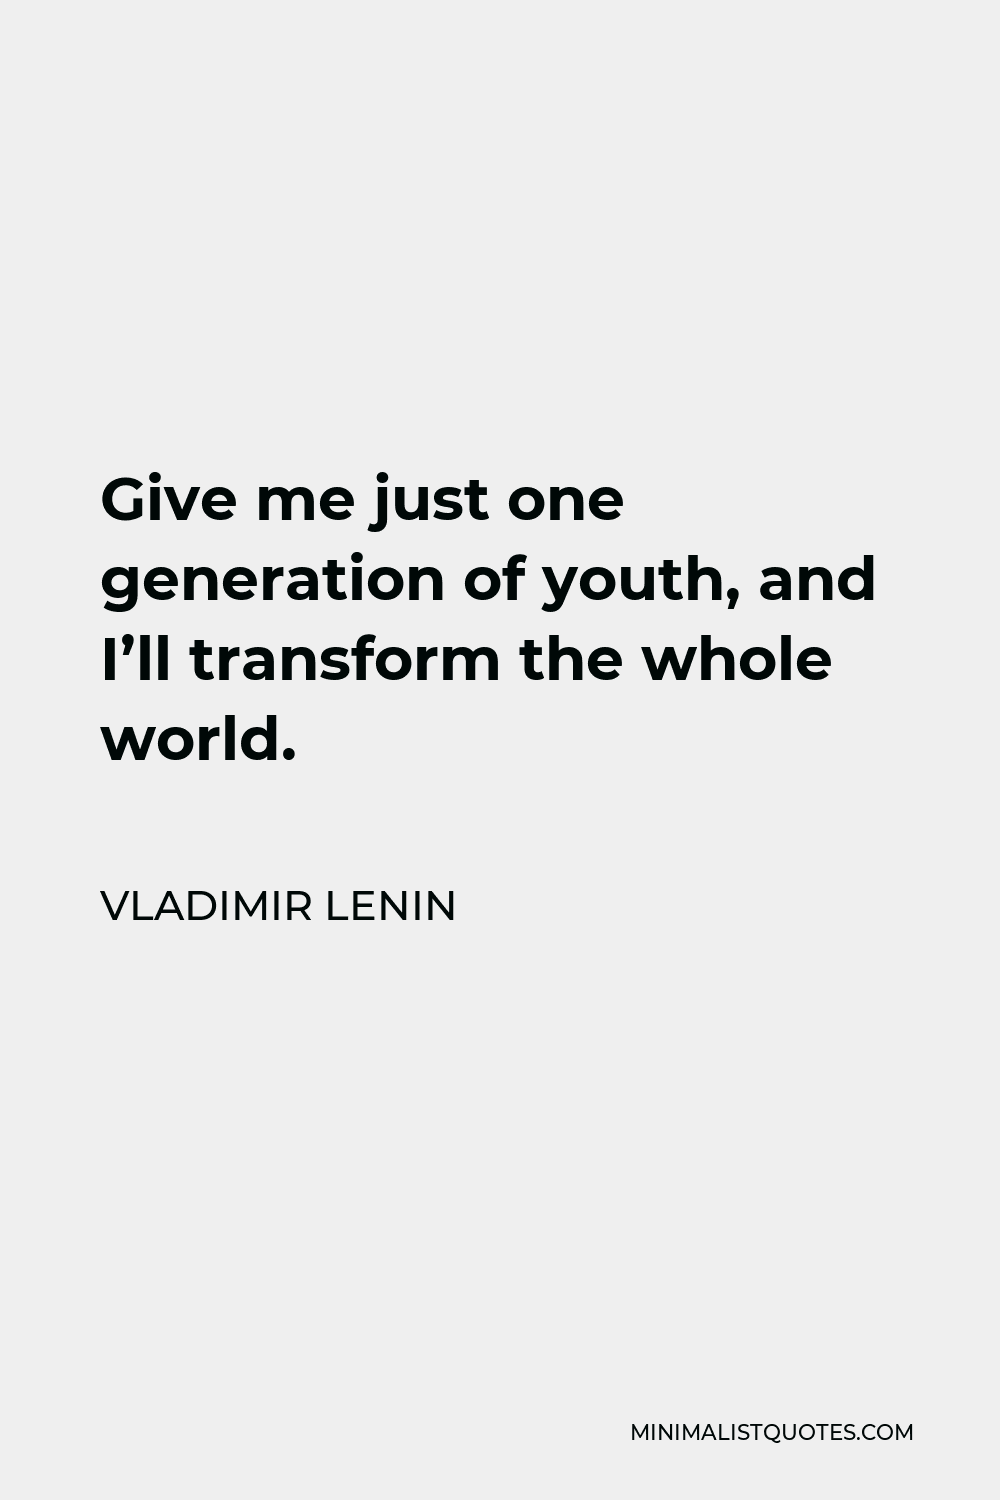 Vladimir Lenin Quote - Give me just one generation of youth, and I’ll transform the whole world.